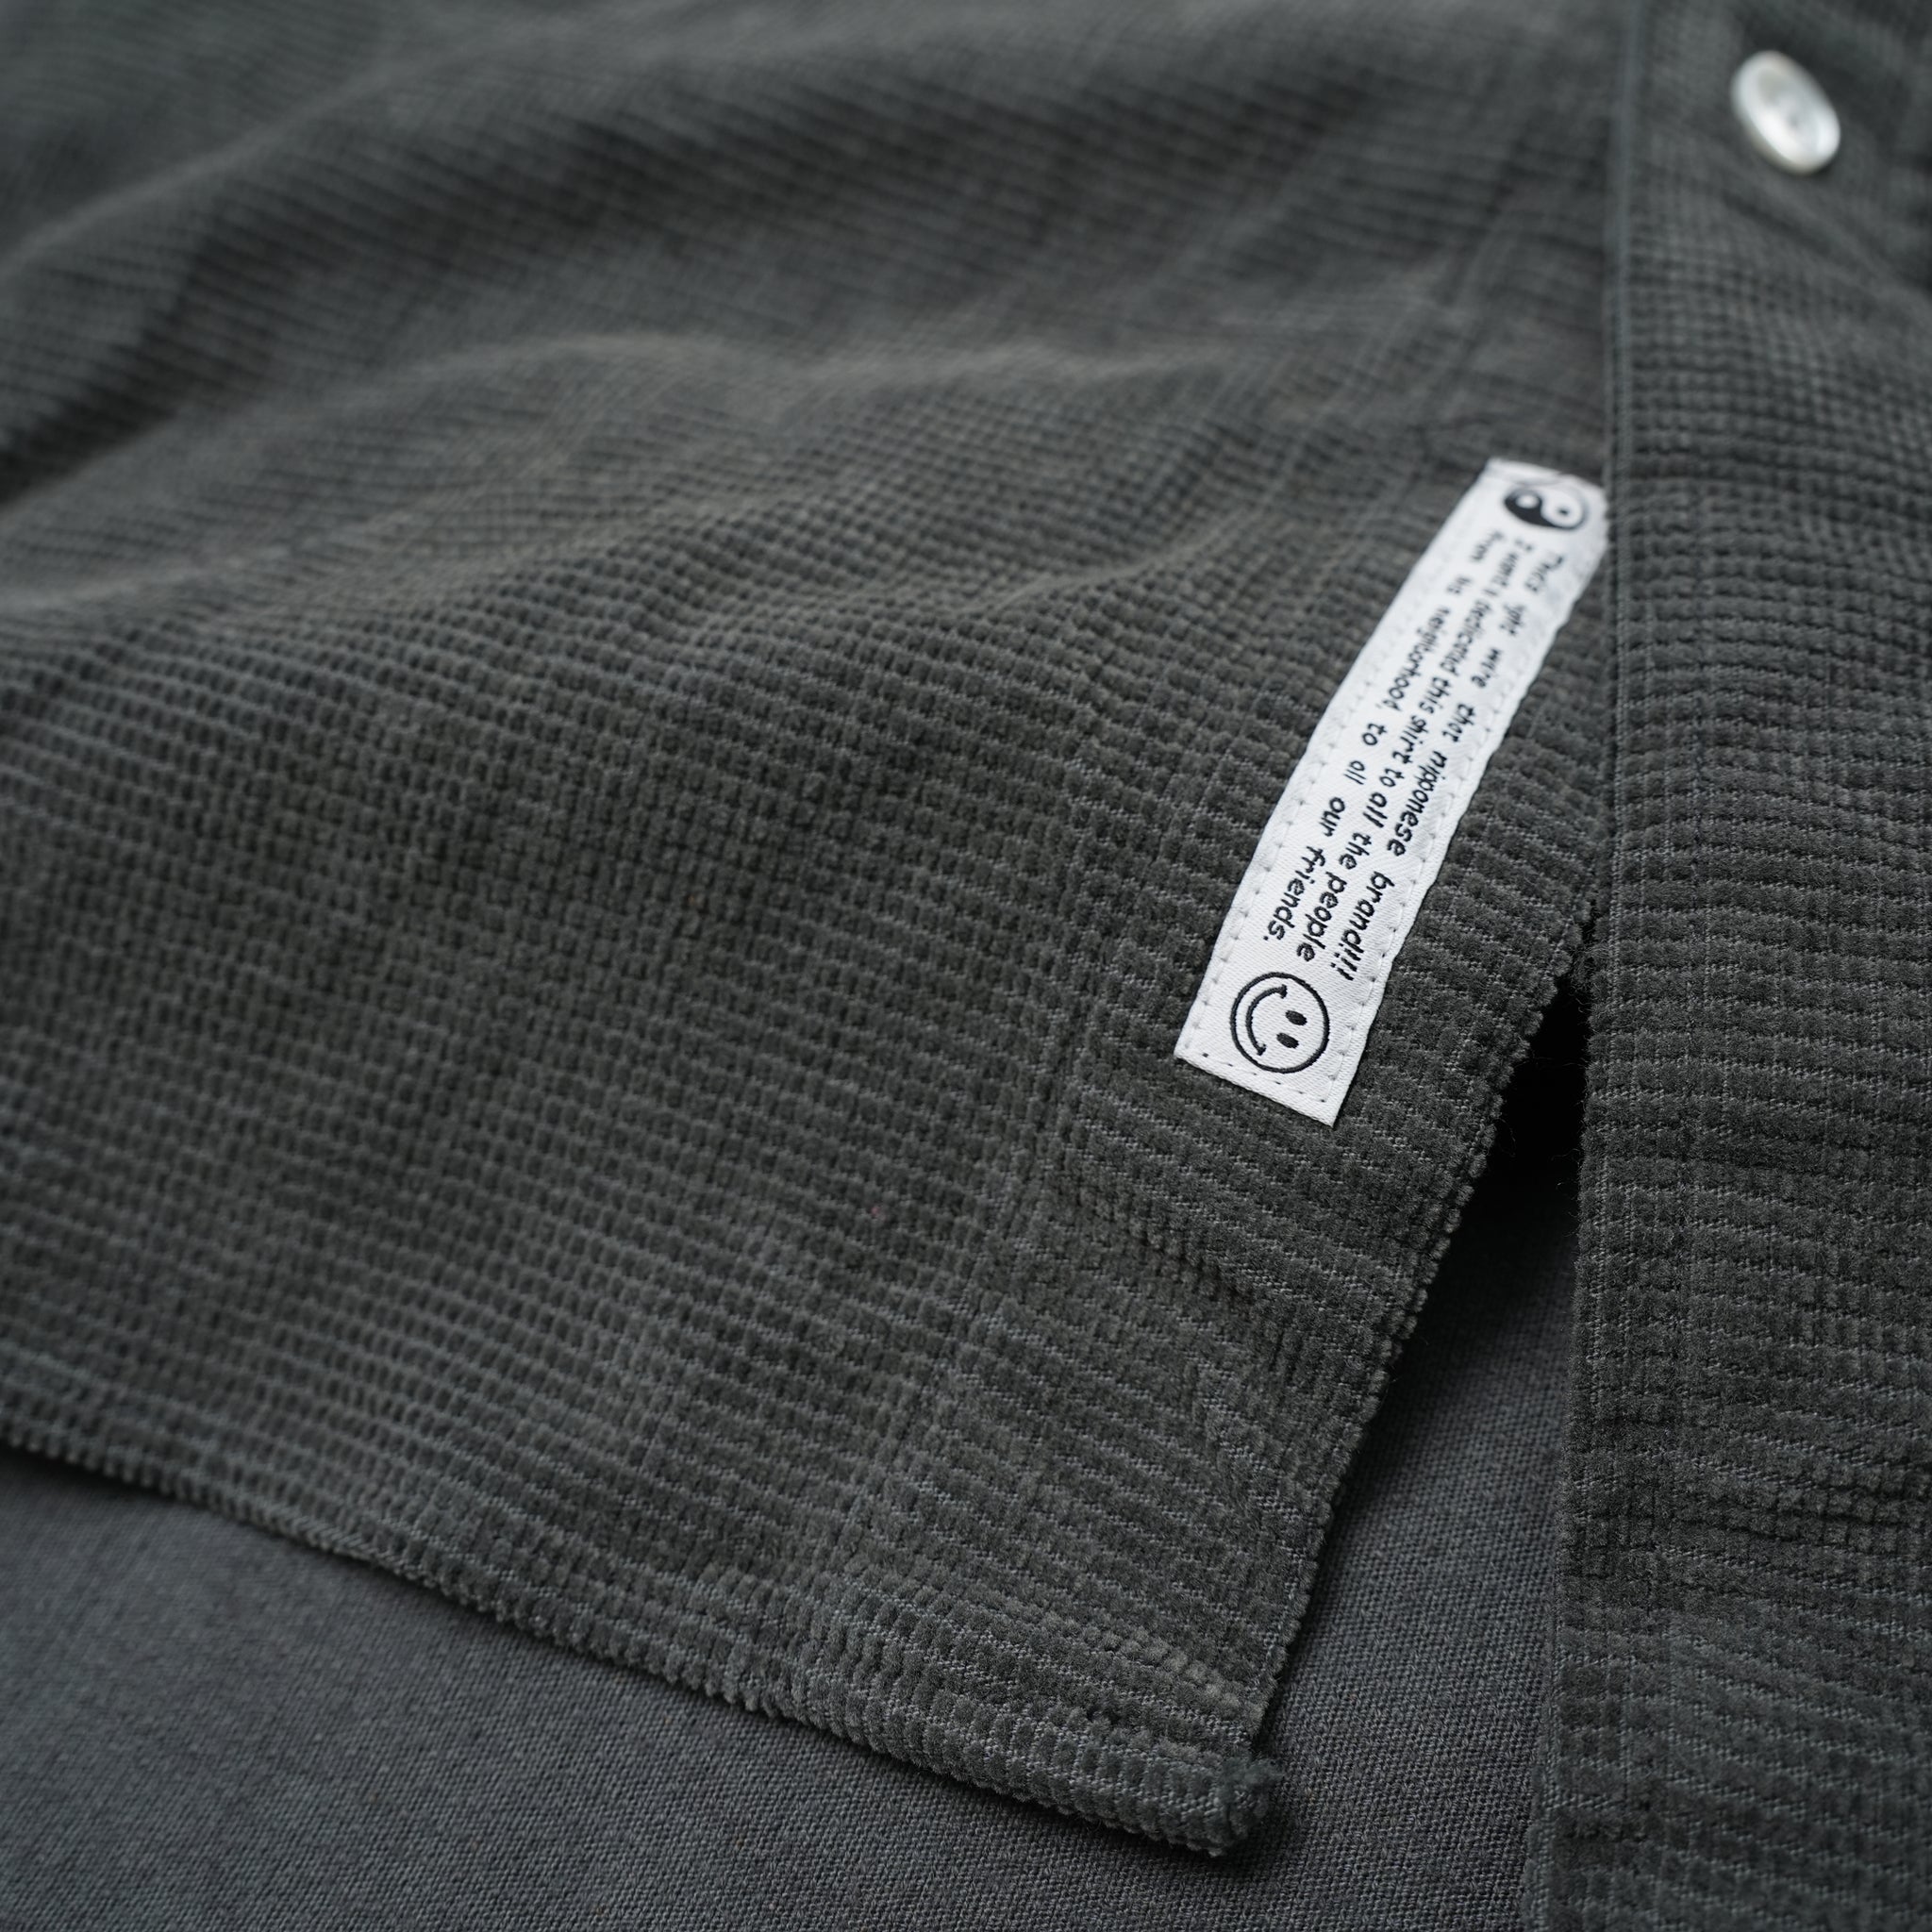 Name: BD SHIRTS | Color:Cord | Size:Regular 【CITYLIGHTS PRODUCTS_シティライツプロダクツ】